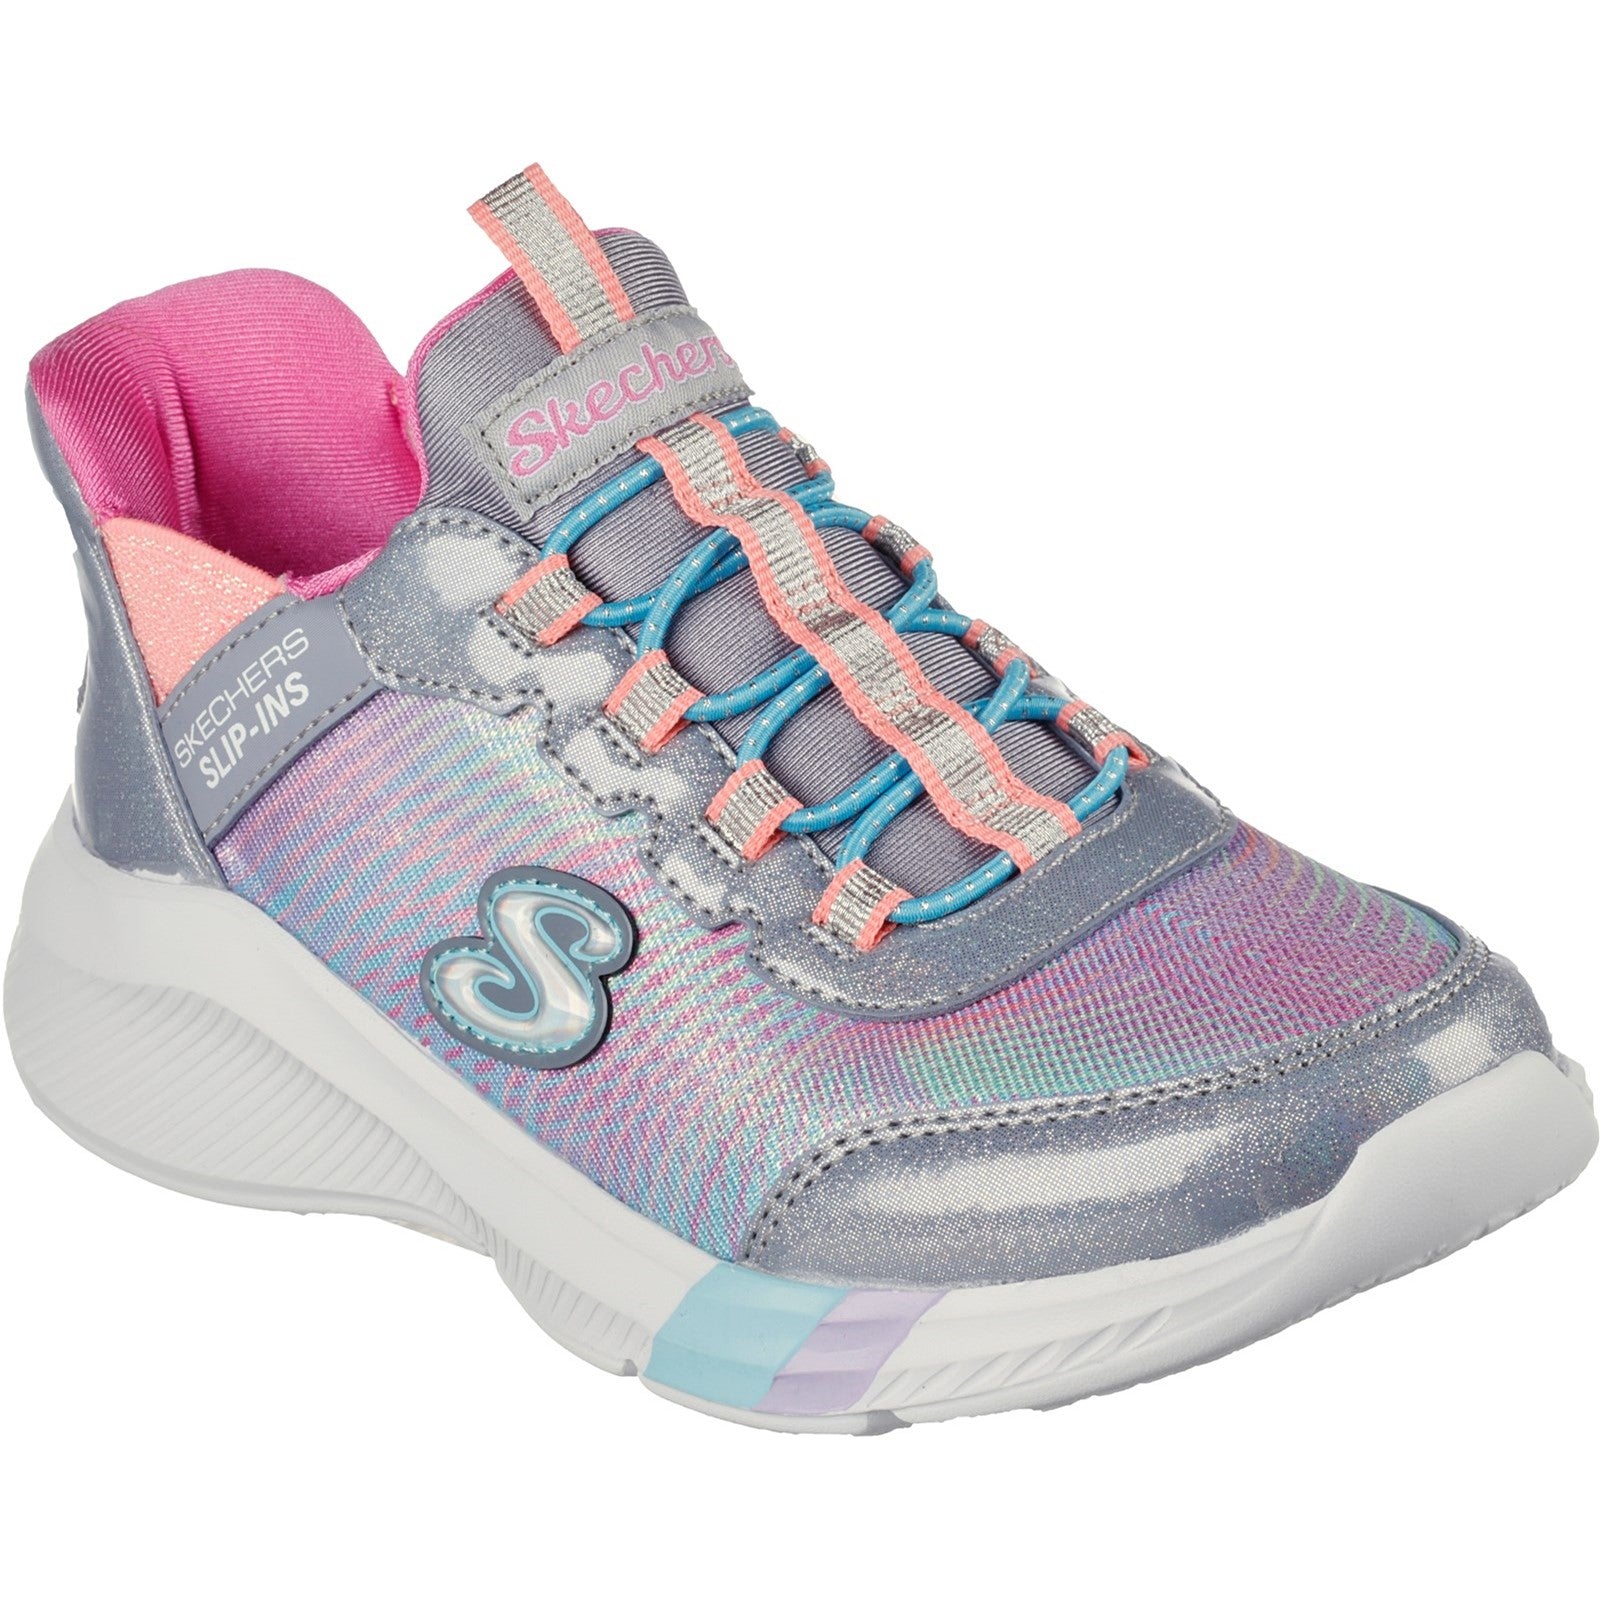 Skechers Girls Dreamy Lites Colorful Prism Slip On Trainers - Grey